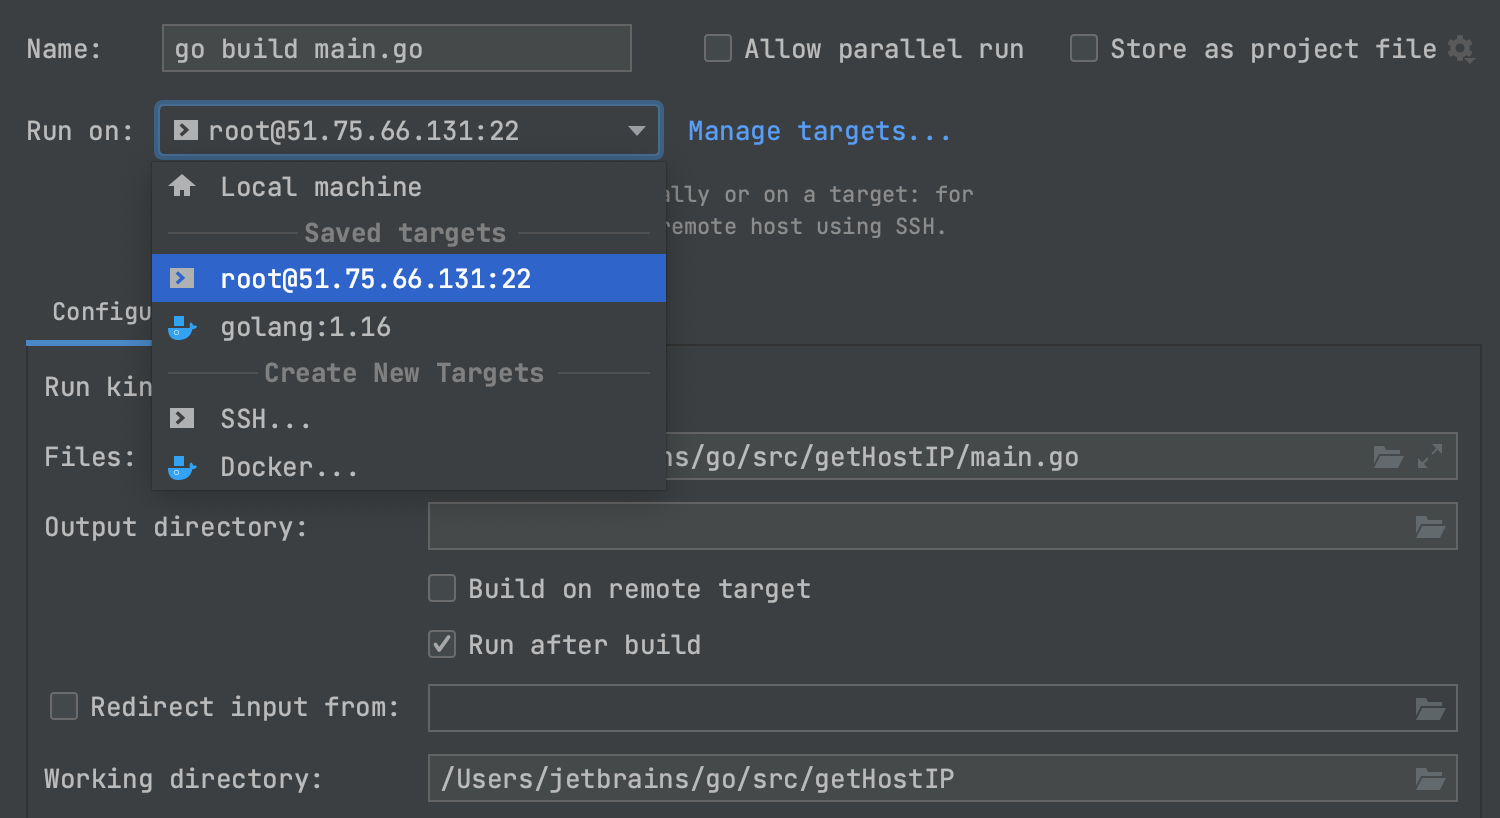 Configuring created targets in the 'Run Configuration' window